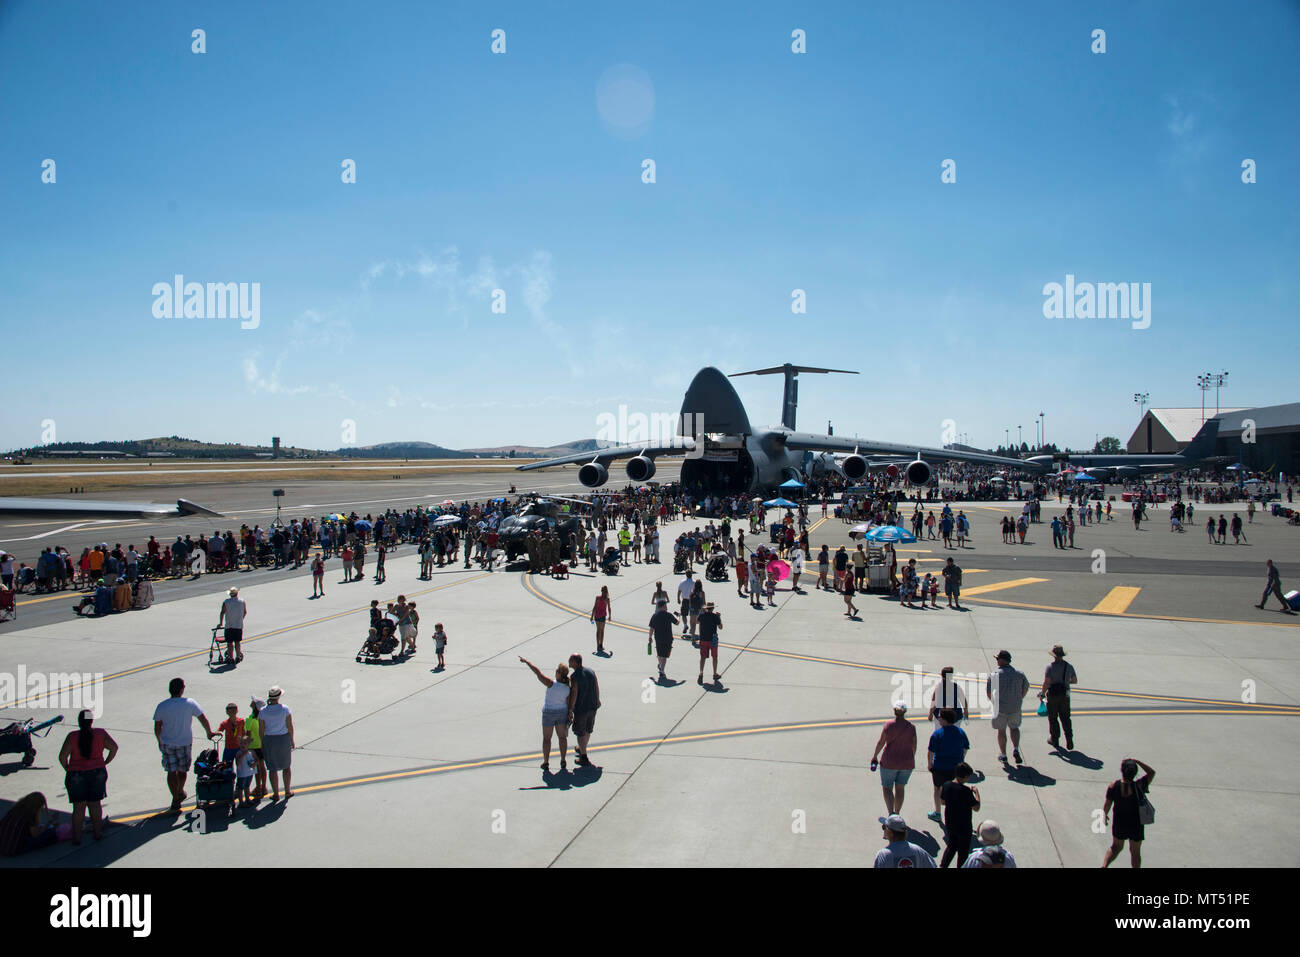 Service members and members from the local community gathered at Fairchild Air Force Base, Washington, during the SkyFest 2017 Air Show and Open House at Fairchild Air Force Base, Washington, July 29, 2017. SkyFest is Fairchild’s air show and open house to give the local and regional community the opportunity to view Airmen and our resources. (U.S. Air Force photo/Senior Airman Janelle Patiño) Stock Photo